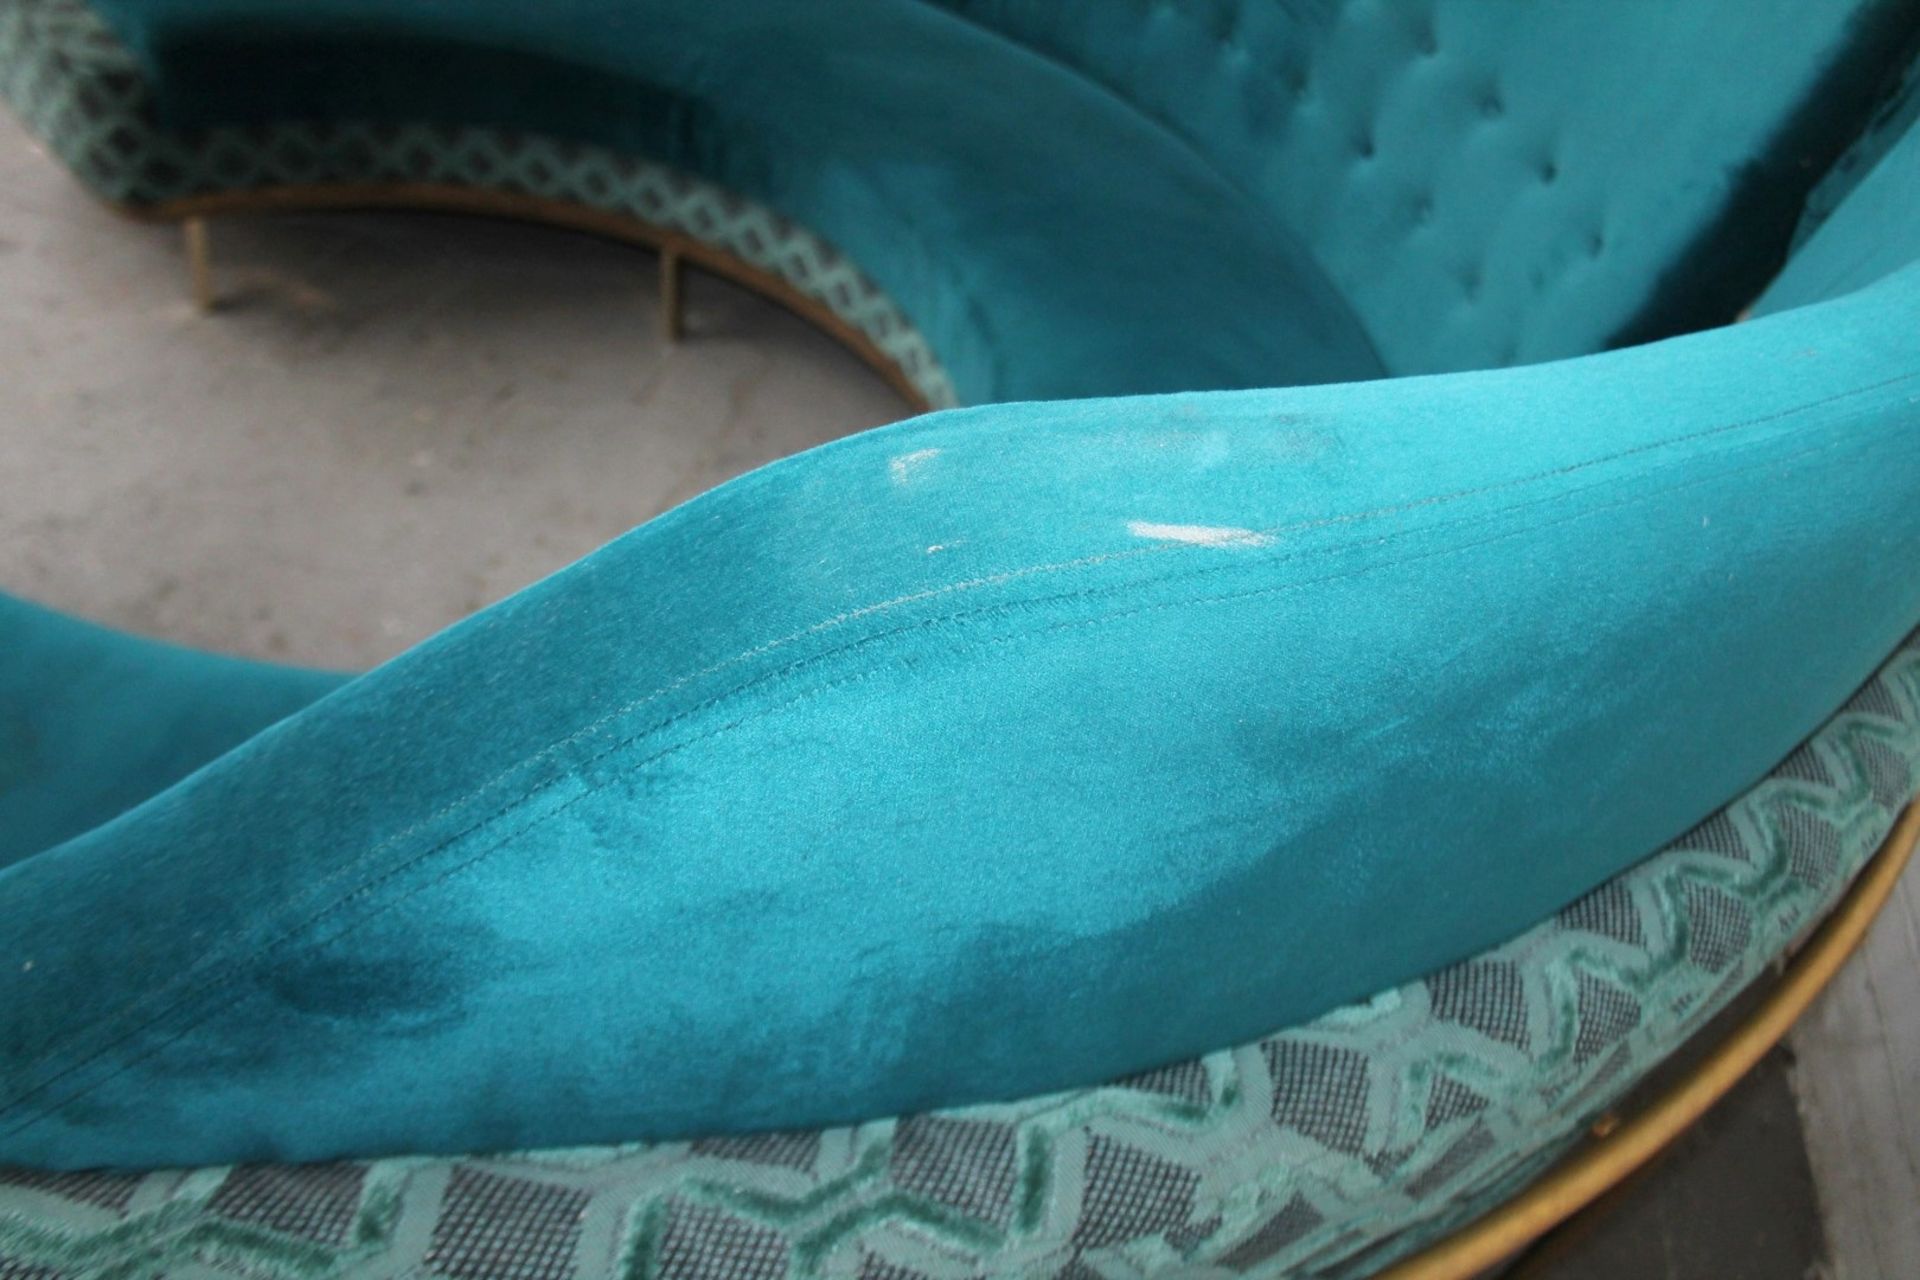 1 x Bespoke Commercial Curved C-Shaped Booth Seating Upholstered In Premium Teal Coloured Fabrics - - Image 14 of 17